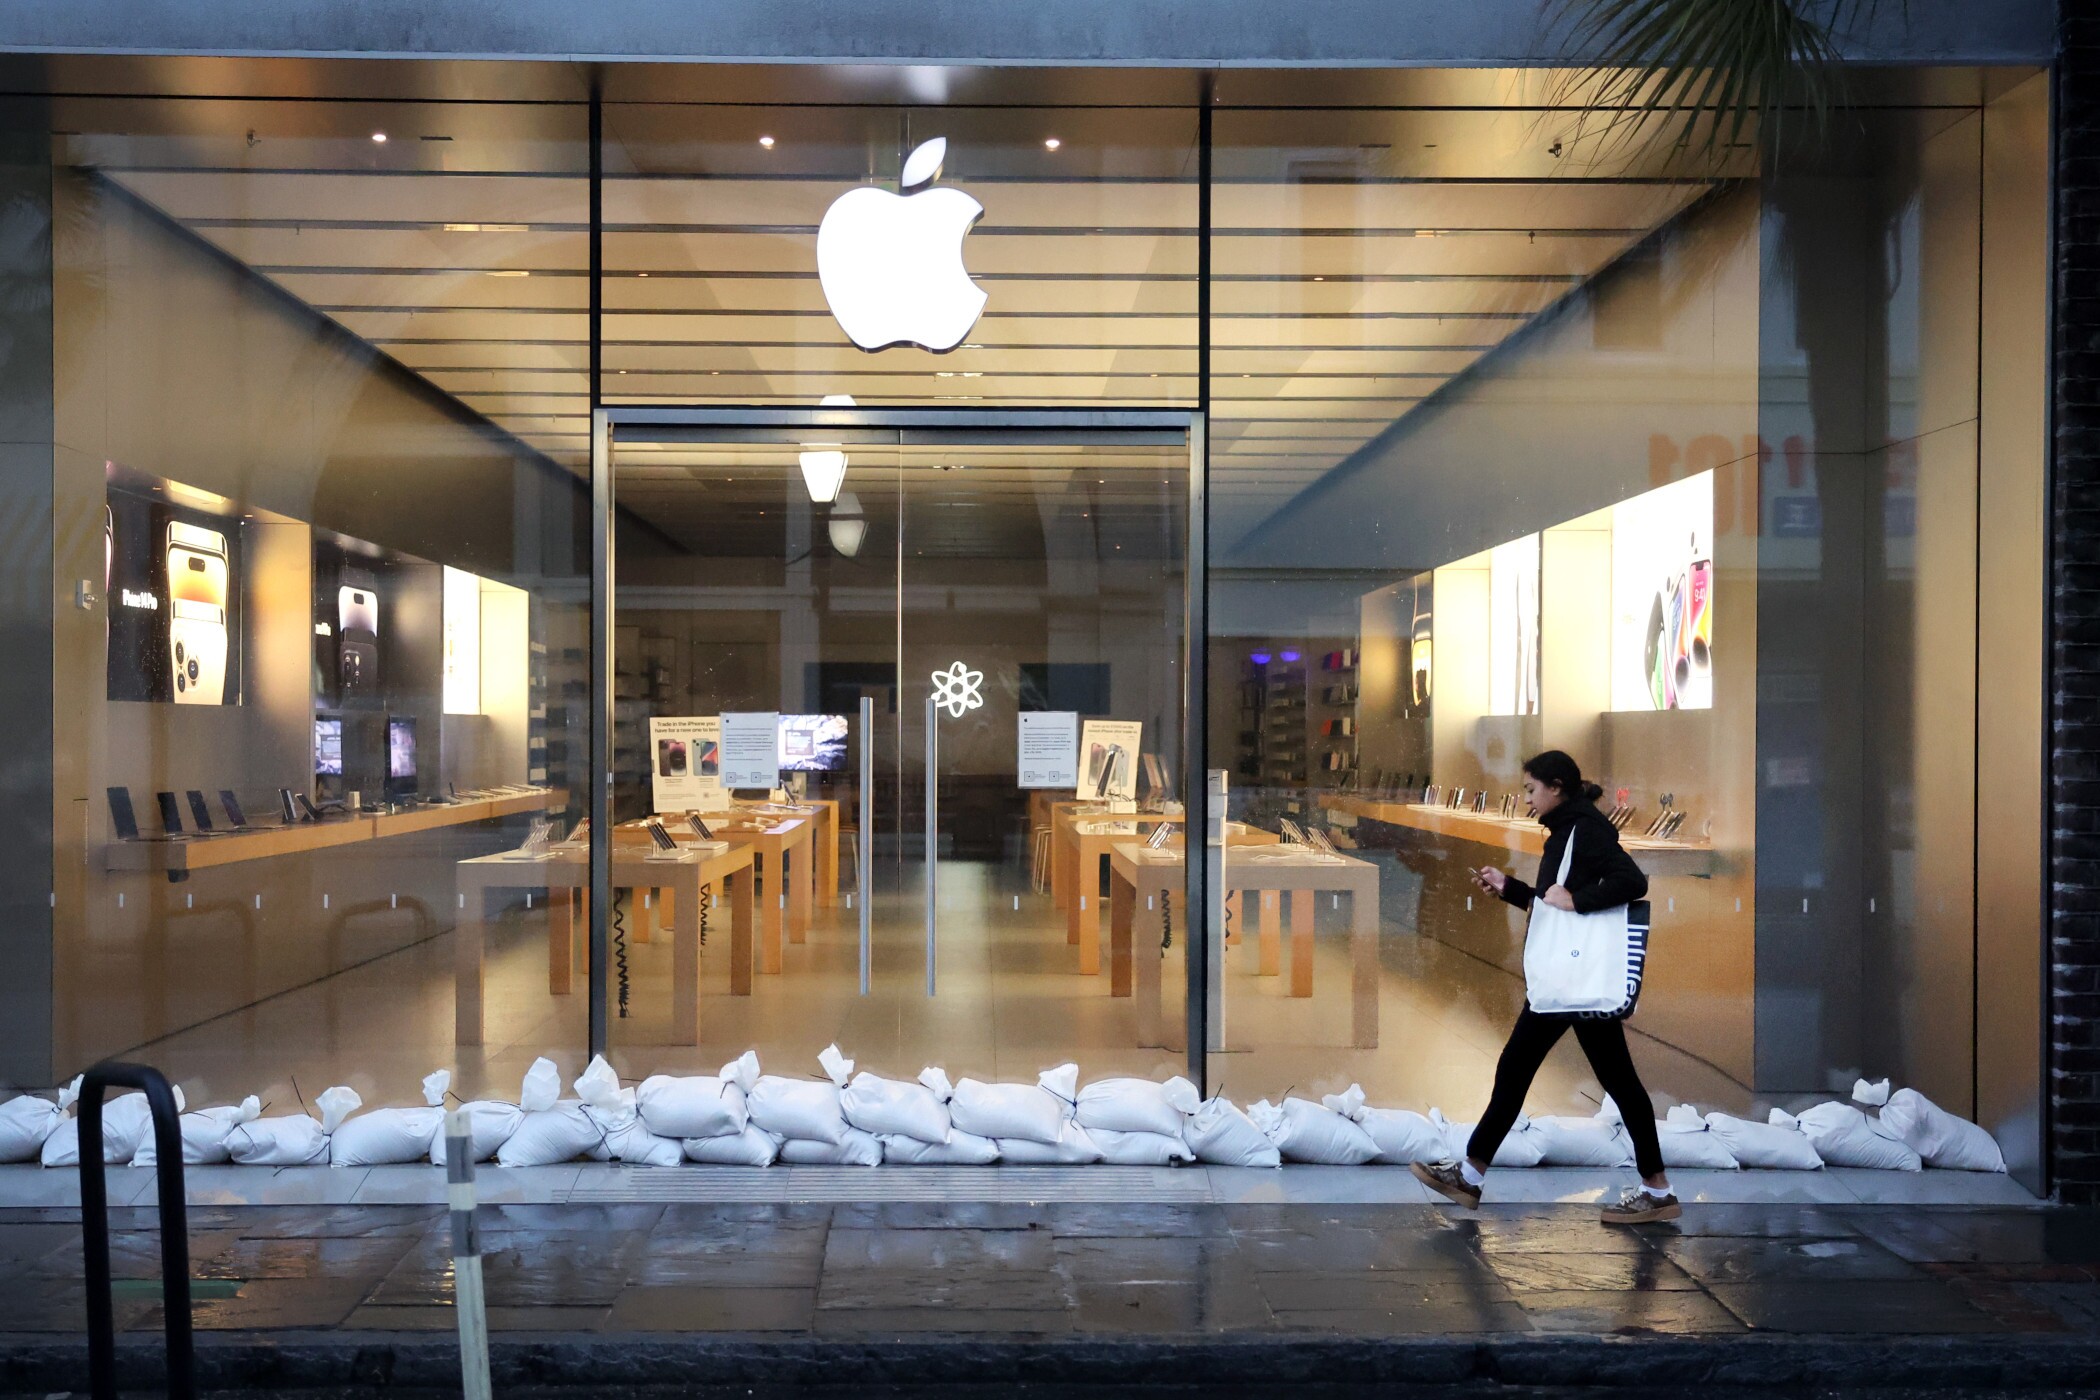 Apple is responding to slowing consumer spending and a wobbly economy with its decision to shed some corporate retail jobs. (Getty Images)